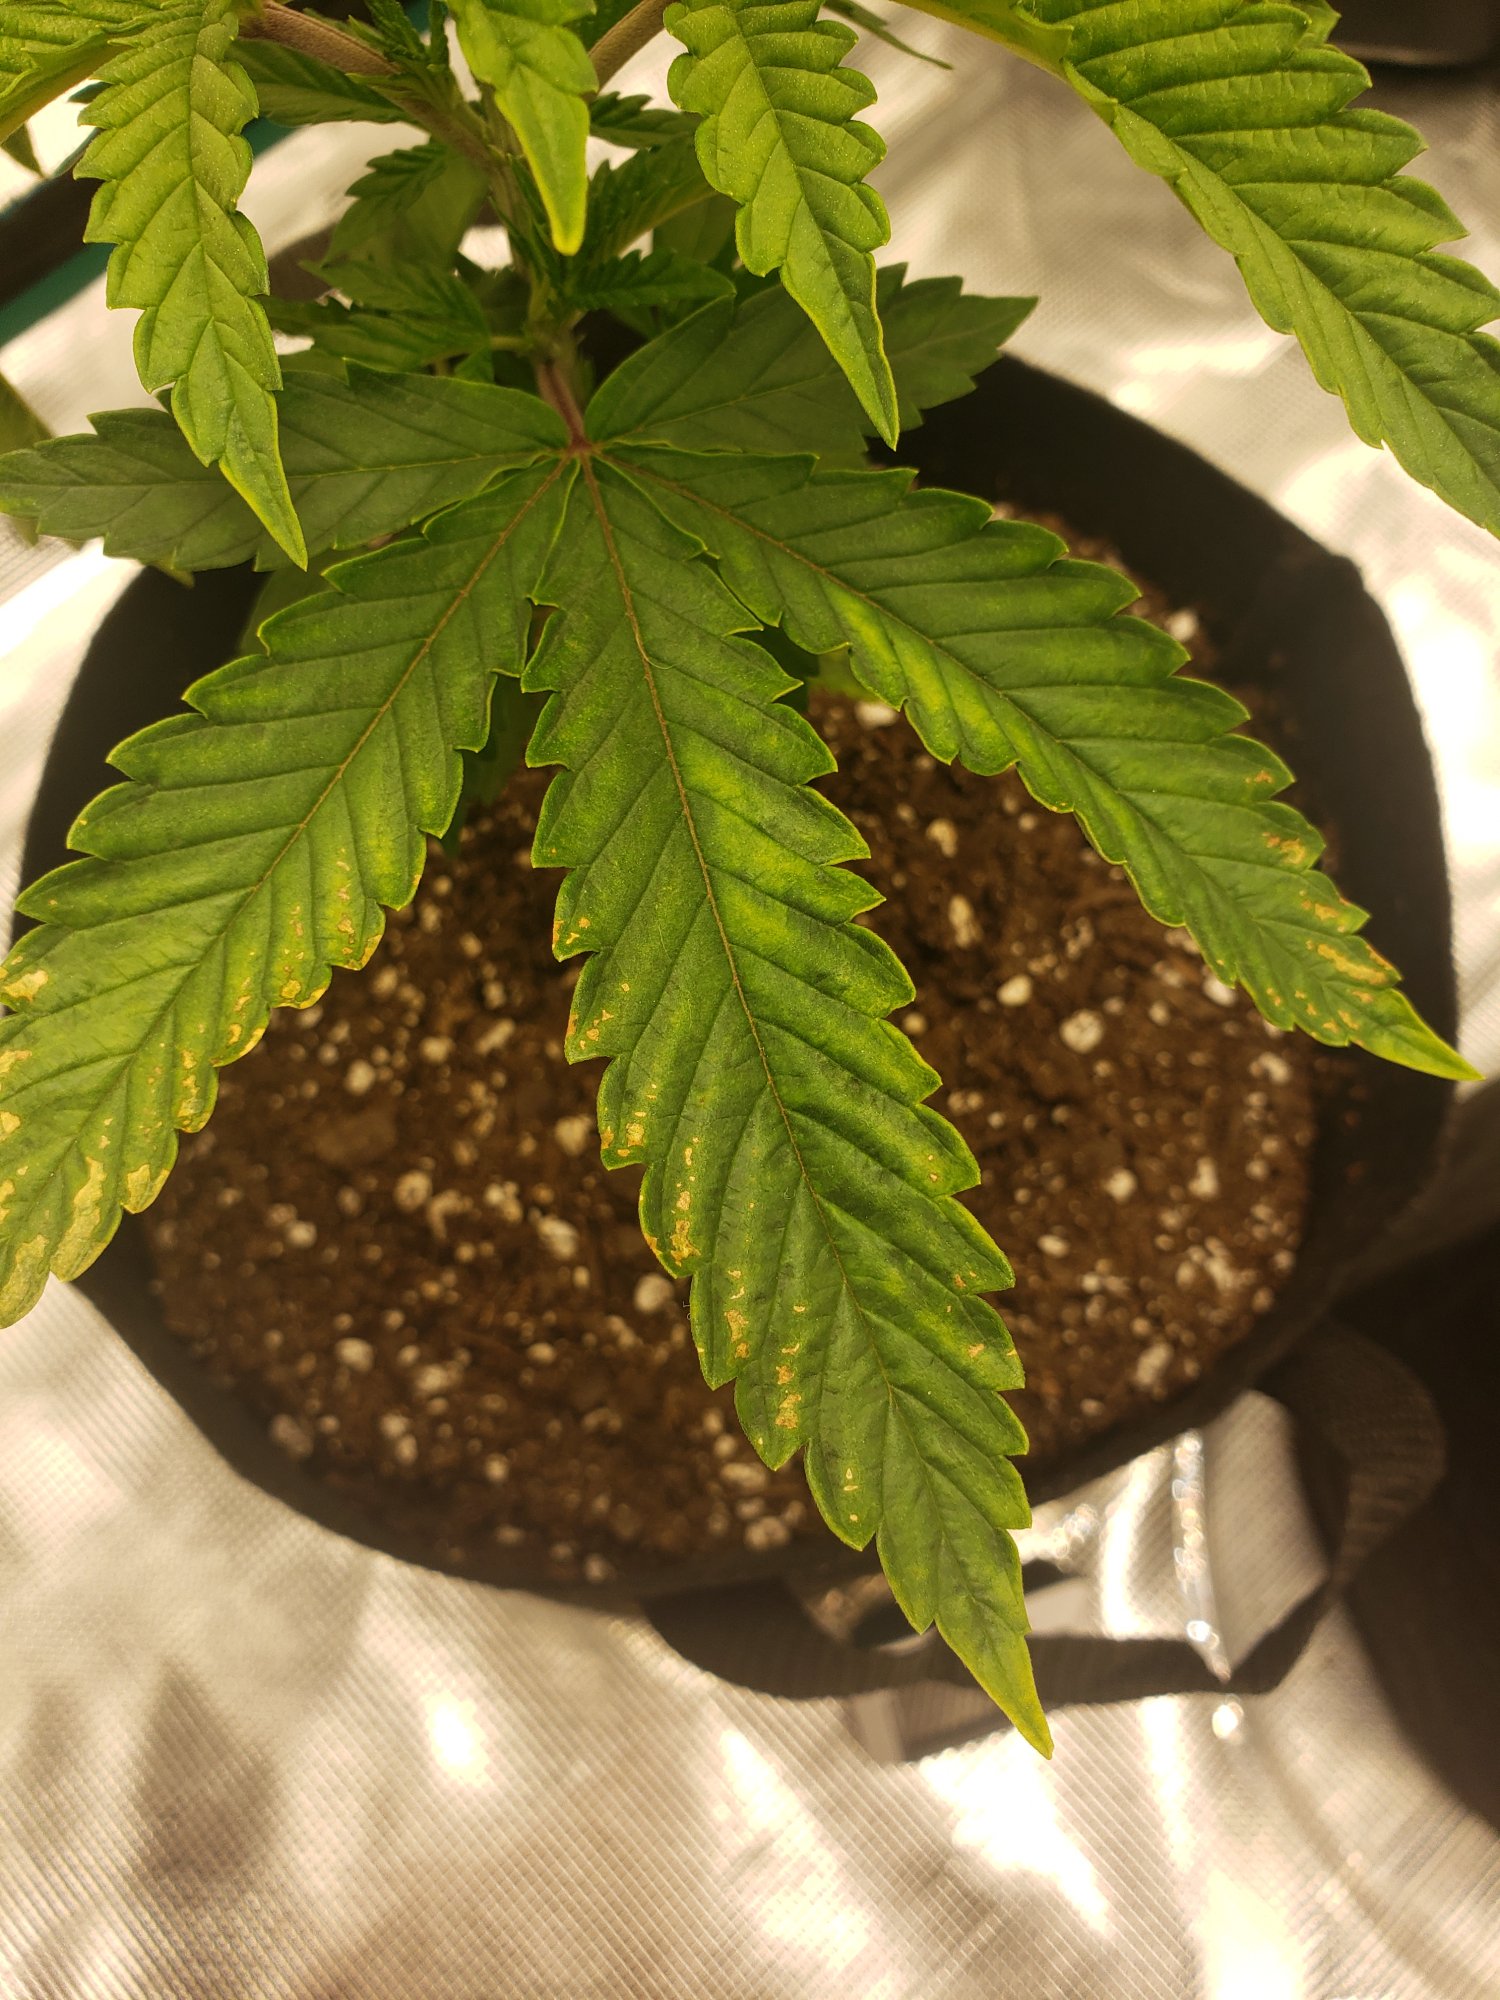 First time grower yellow spot turned browned 2